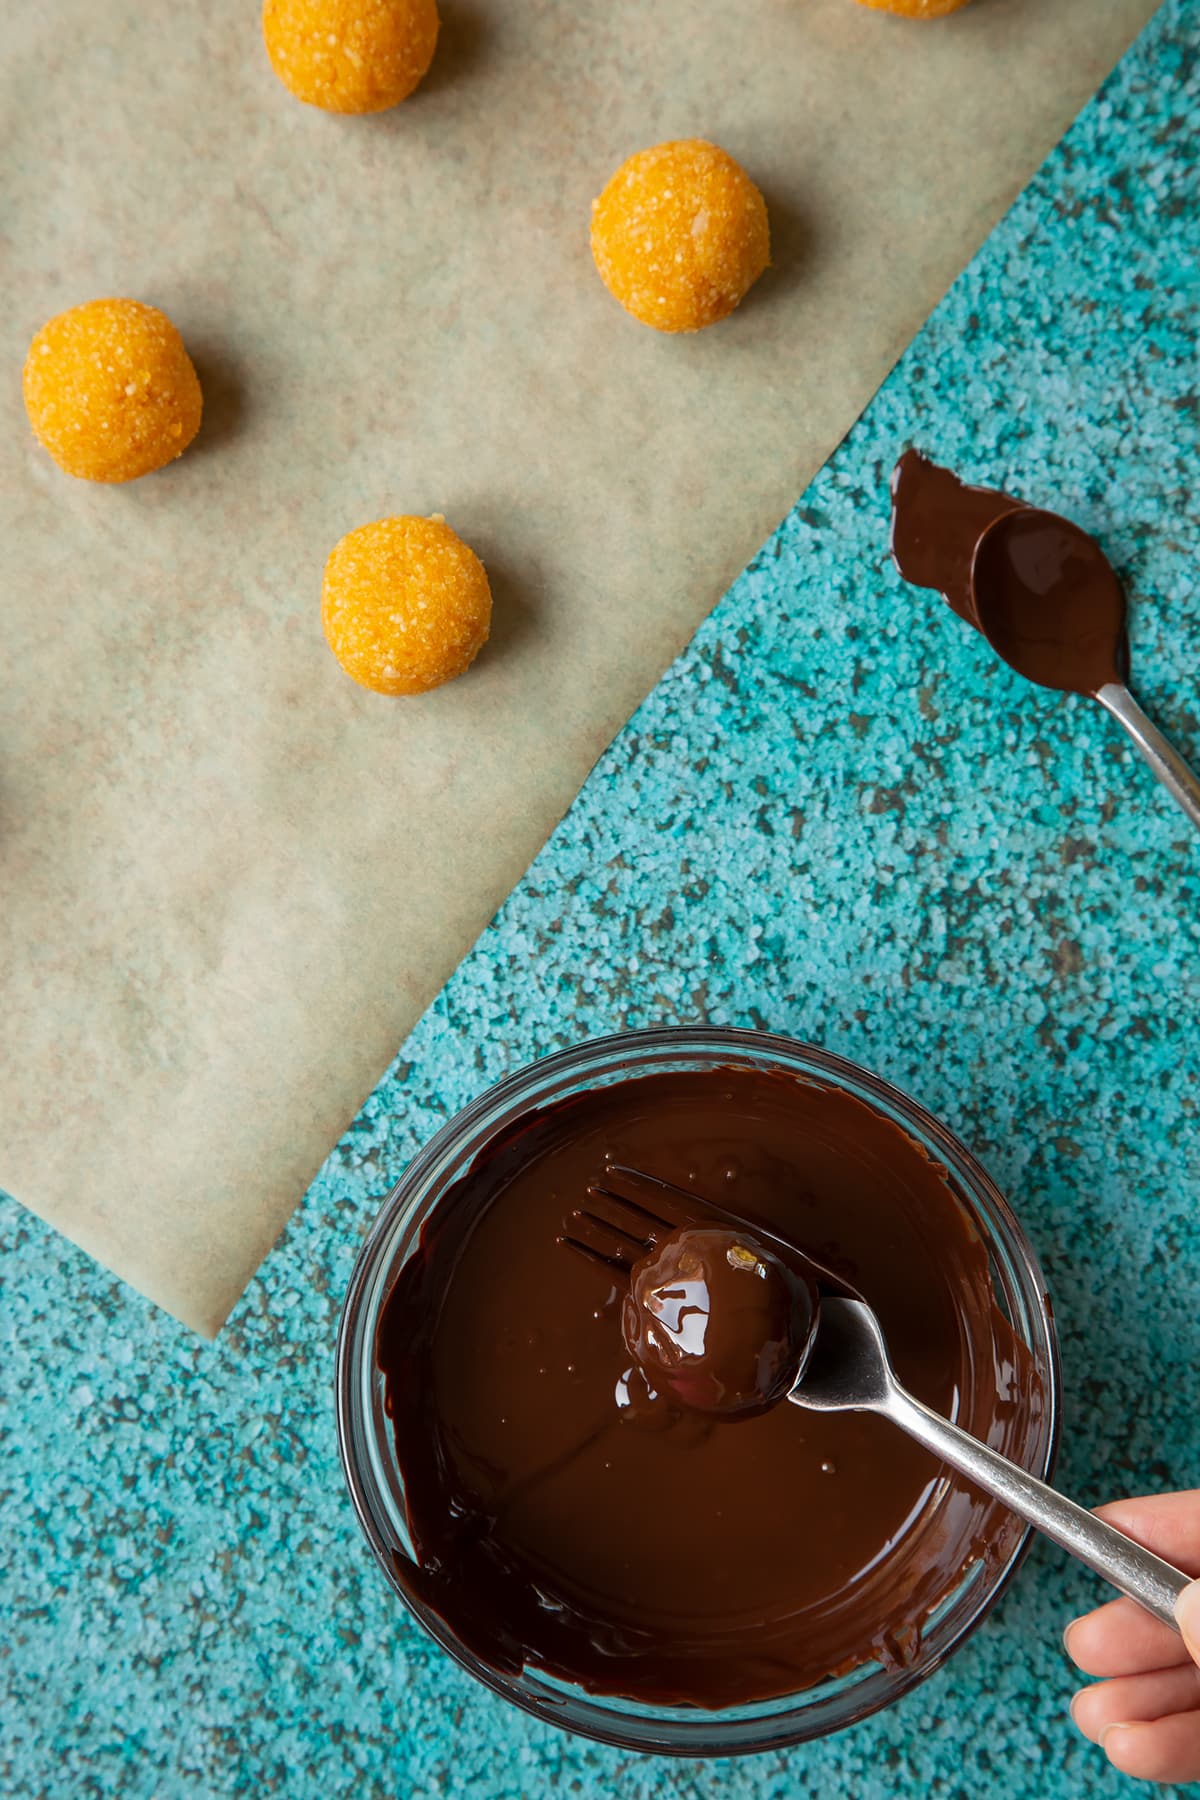 Balls made from blended, apricots and nuts. A small mixing bowl containing melted dark chocolate. A fork lifts an apricot ball coated in chocolate from the bowl.